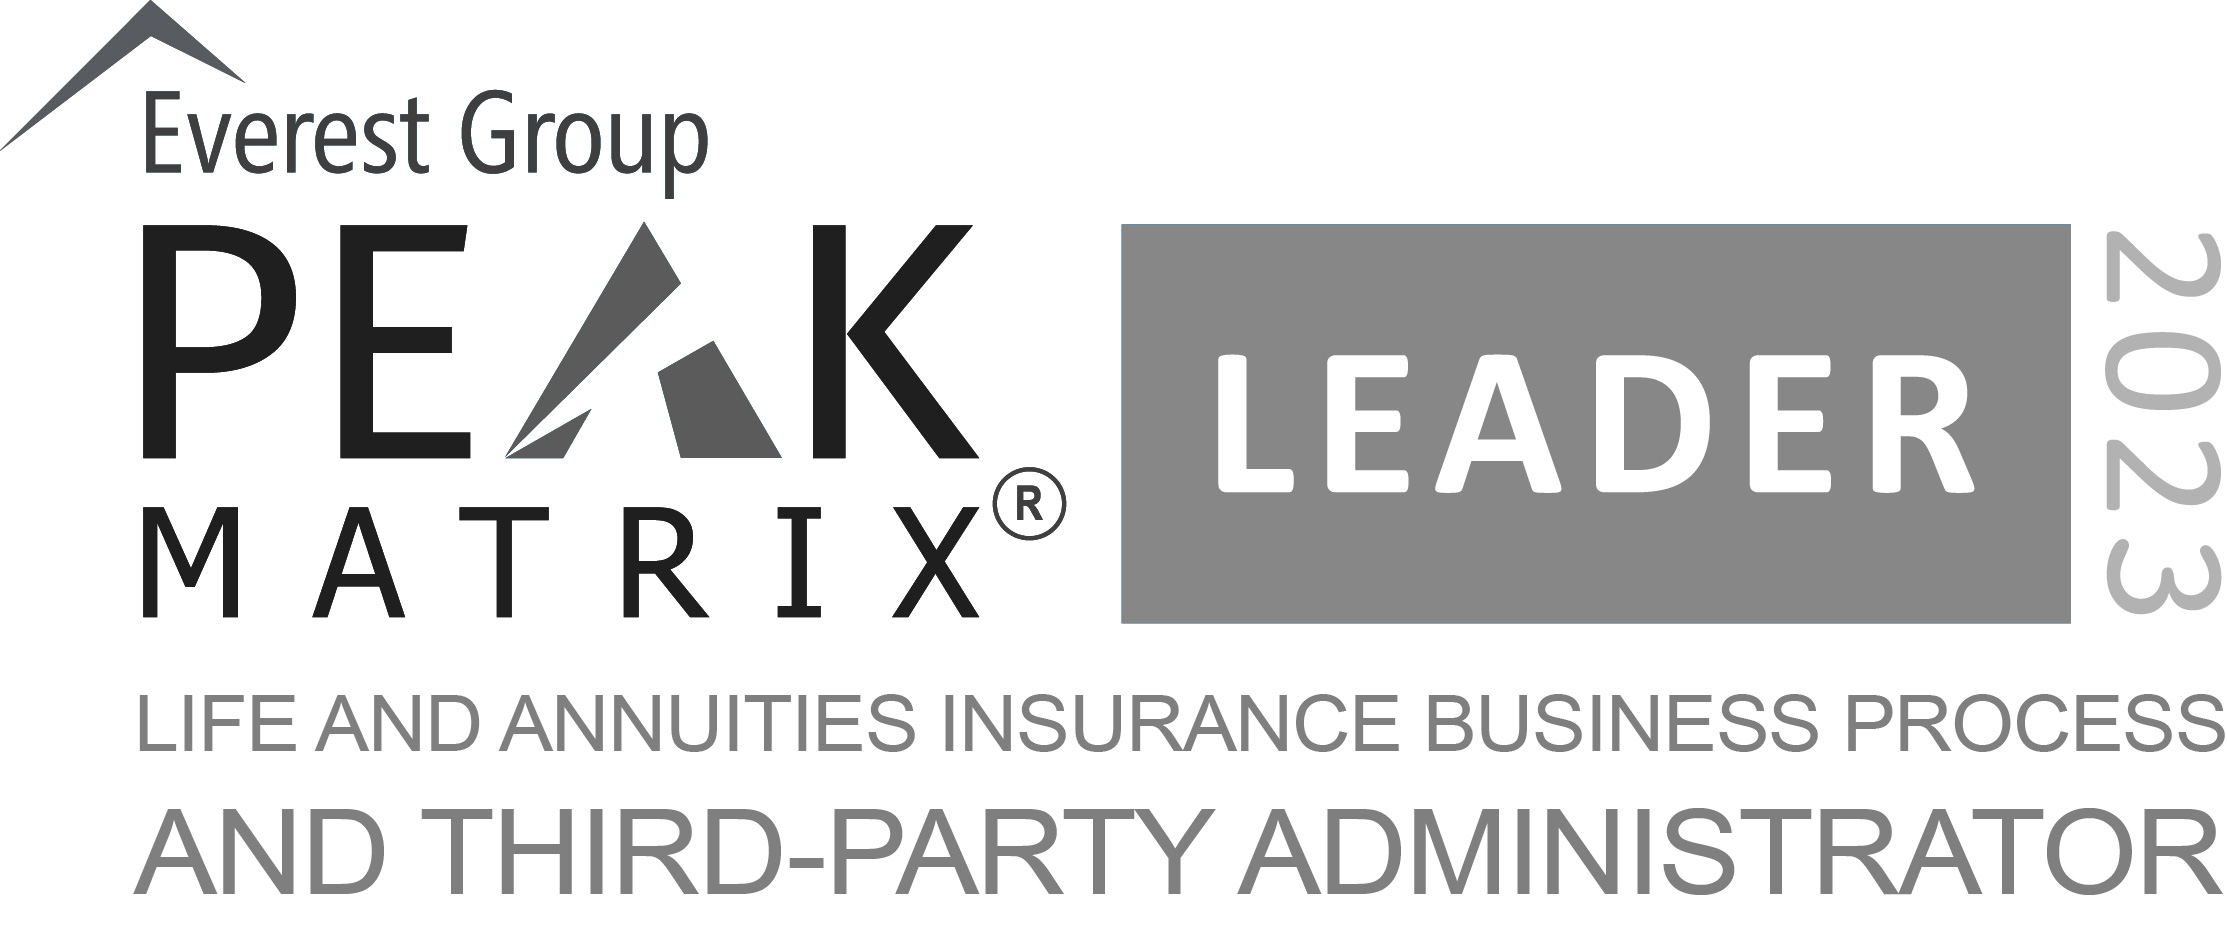 L&A Insurance BPS and TPA 2023 Leader